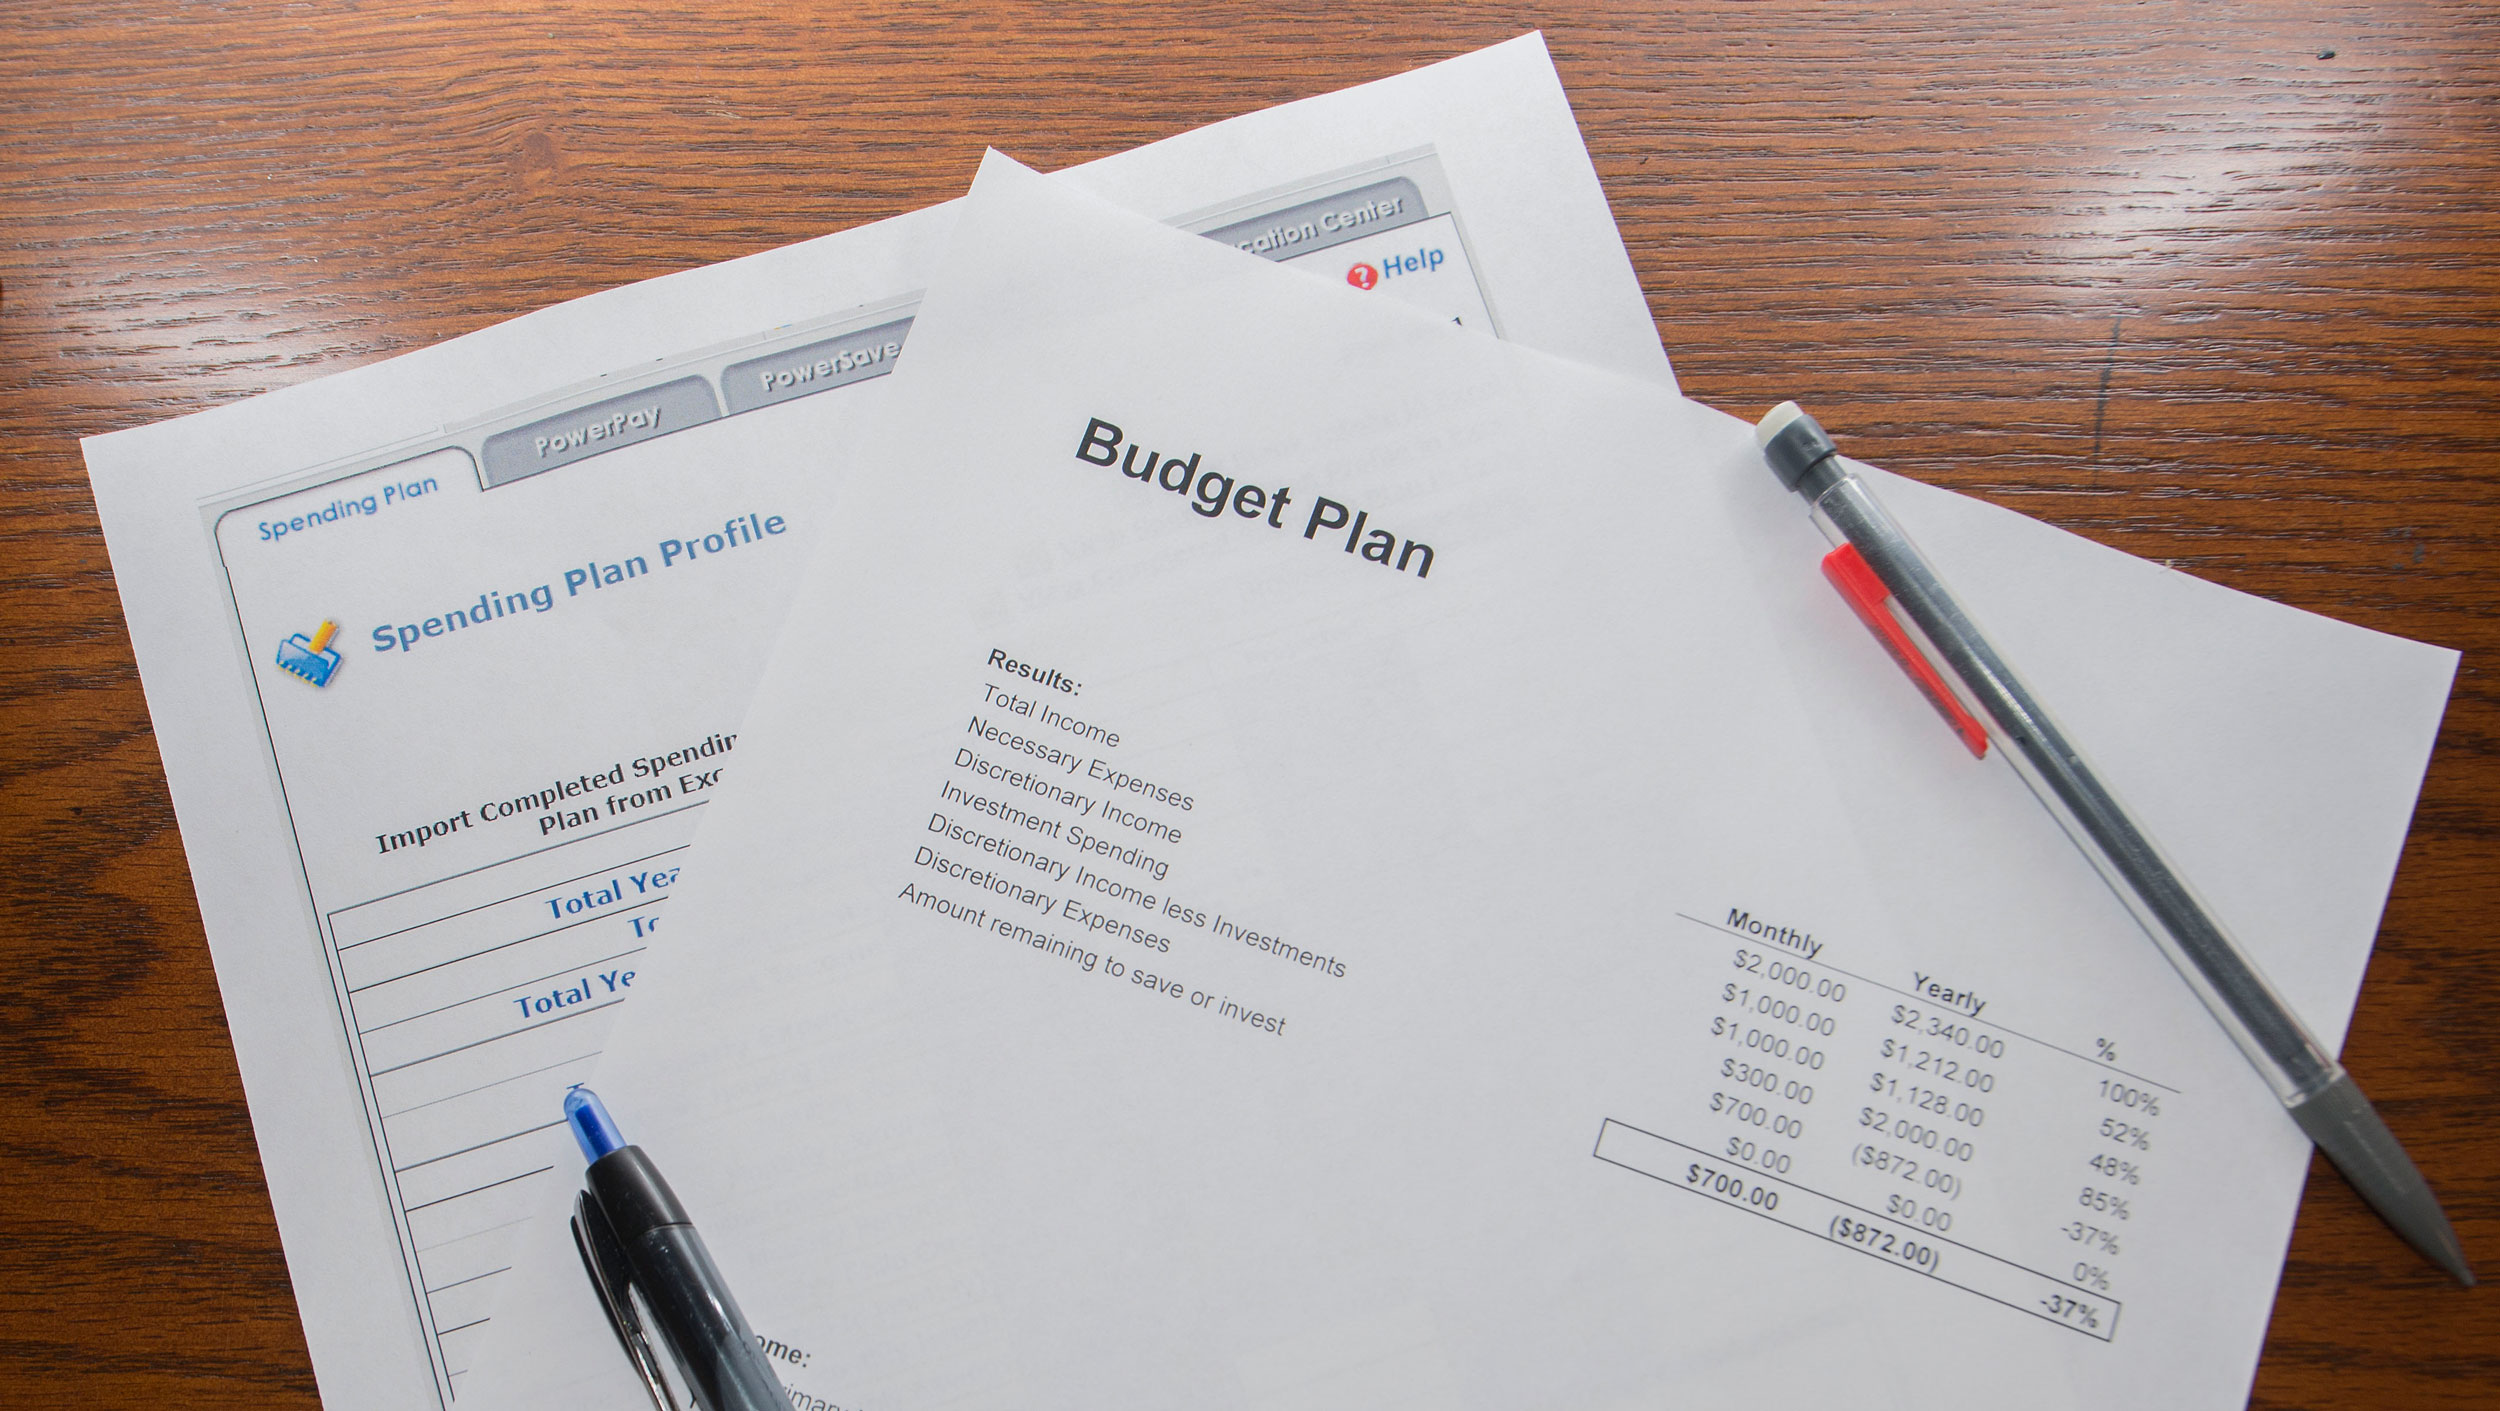 A family budget plan sitting on a desk with a pen and pencil.